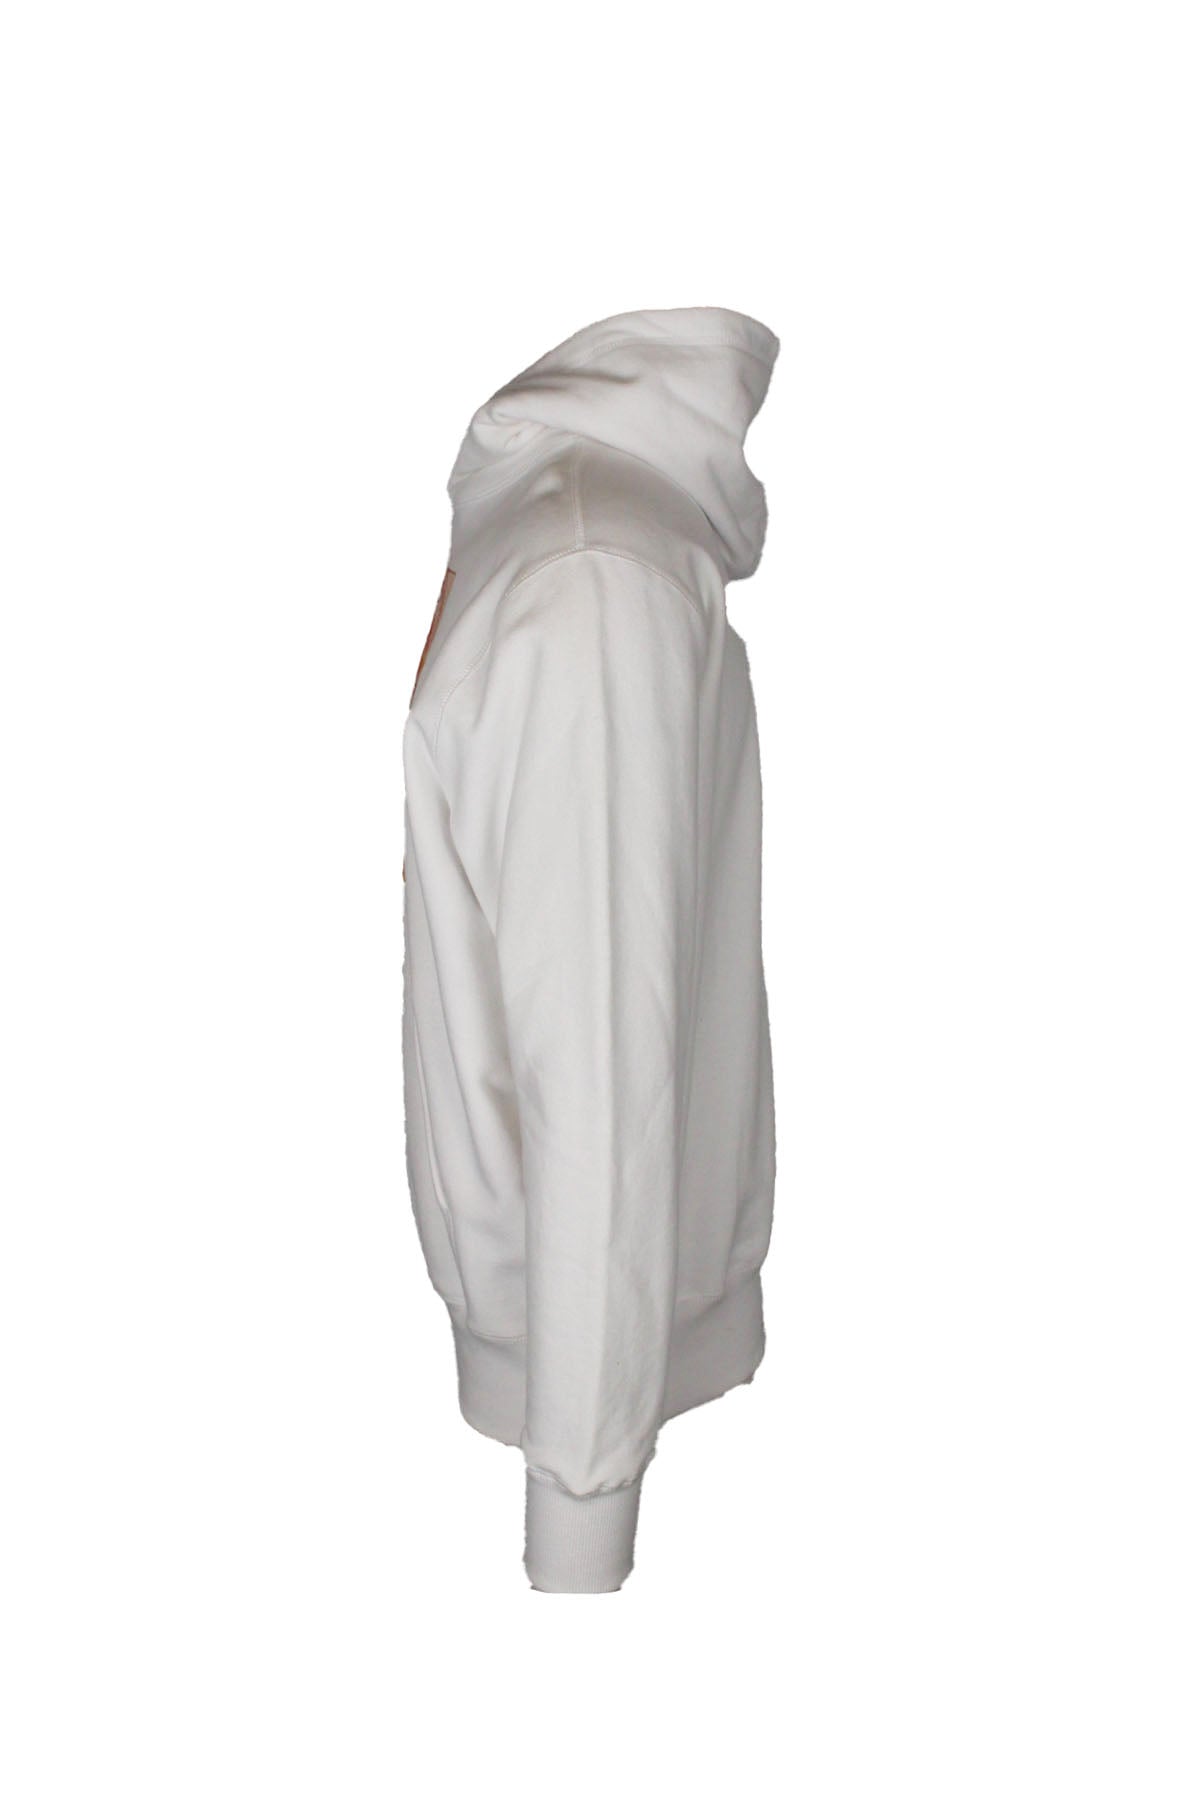 profile view with left sleeve of hoodie.